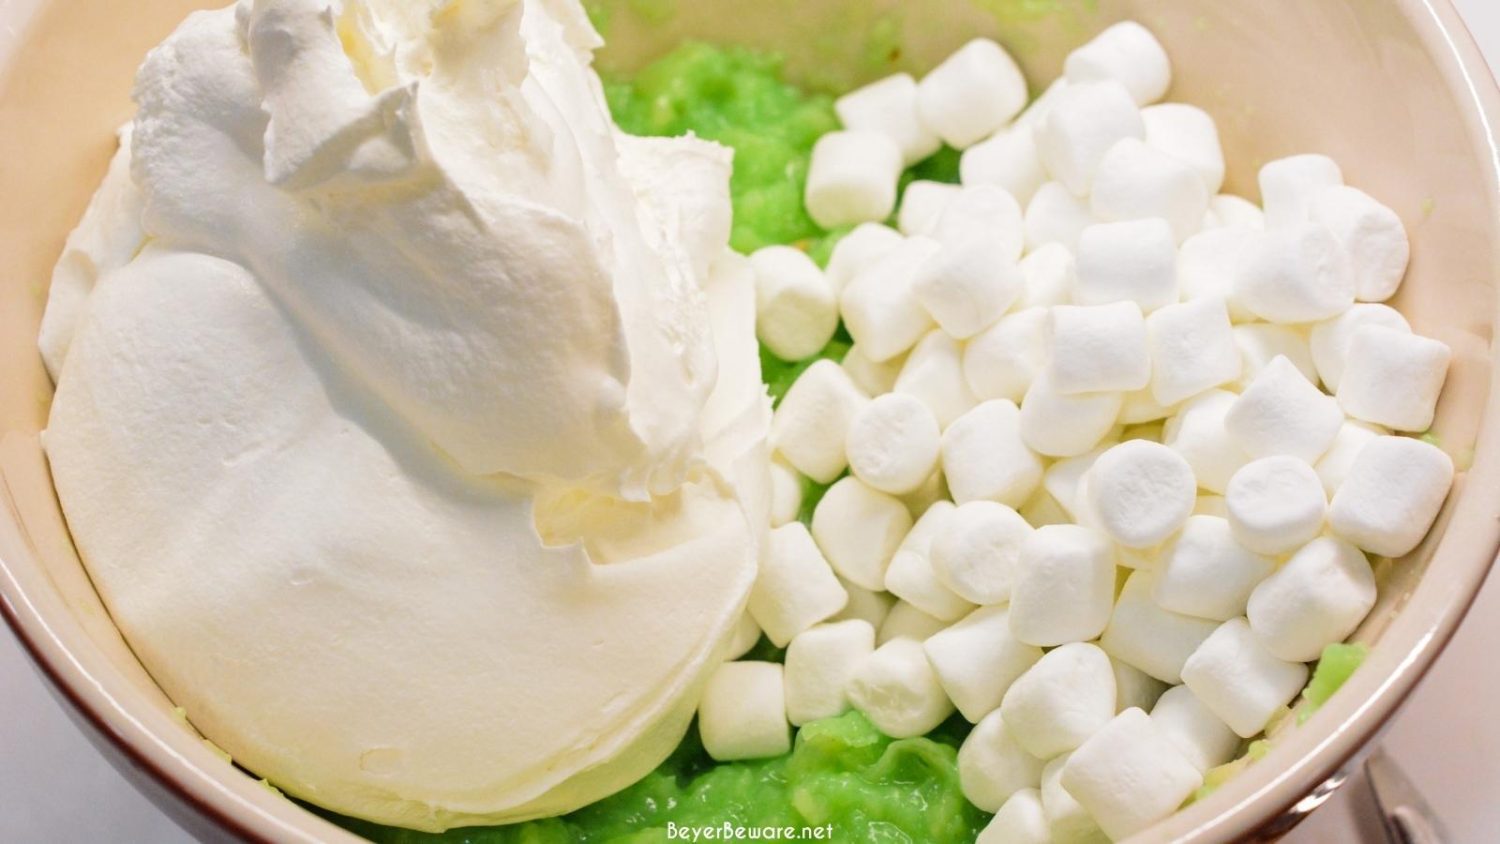 Watergate Salad is a simple 5-ingredient recipe made with instant pistachio pudding, pineapple, marshmallows, cool whip, and nuts. Want the pistachio fluff salad instead? Just leave the nuts out!